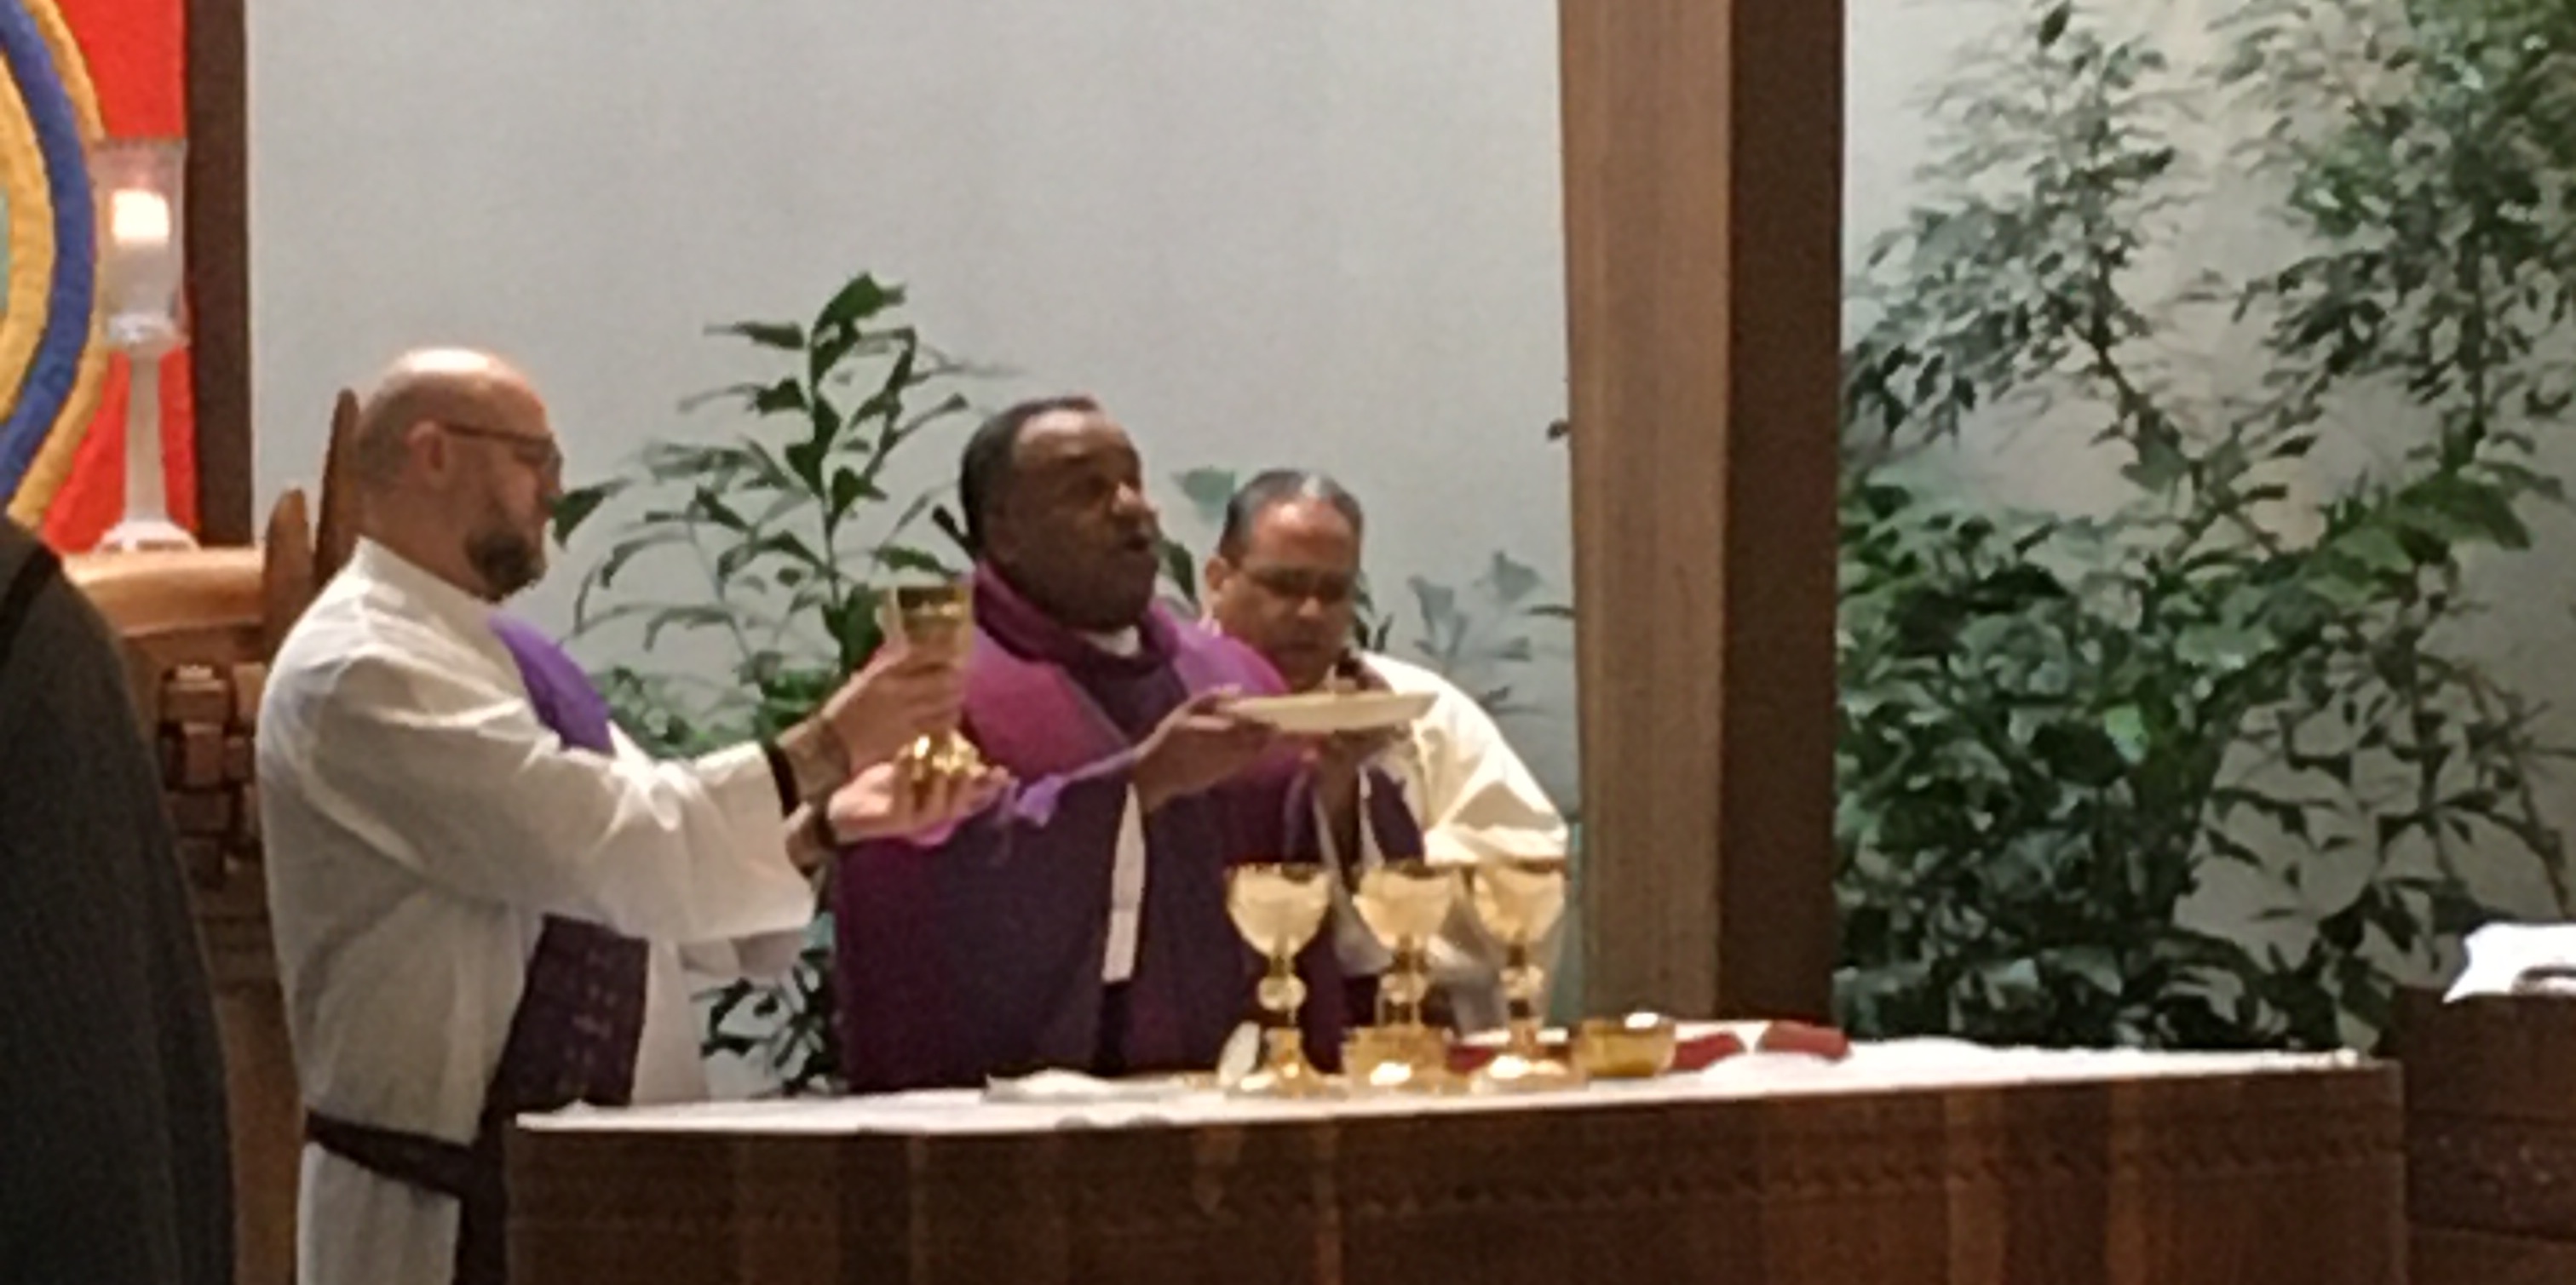 Father Jones with bread and wine in front of Catholic altar with deacon and priest on sides